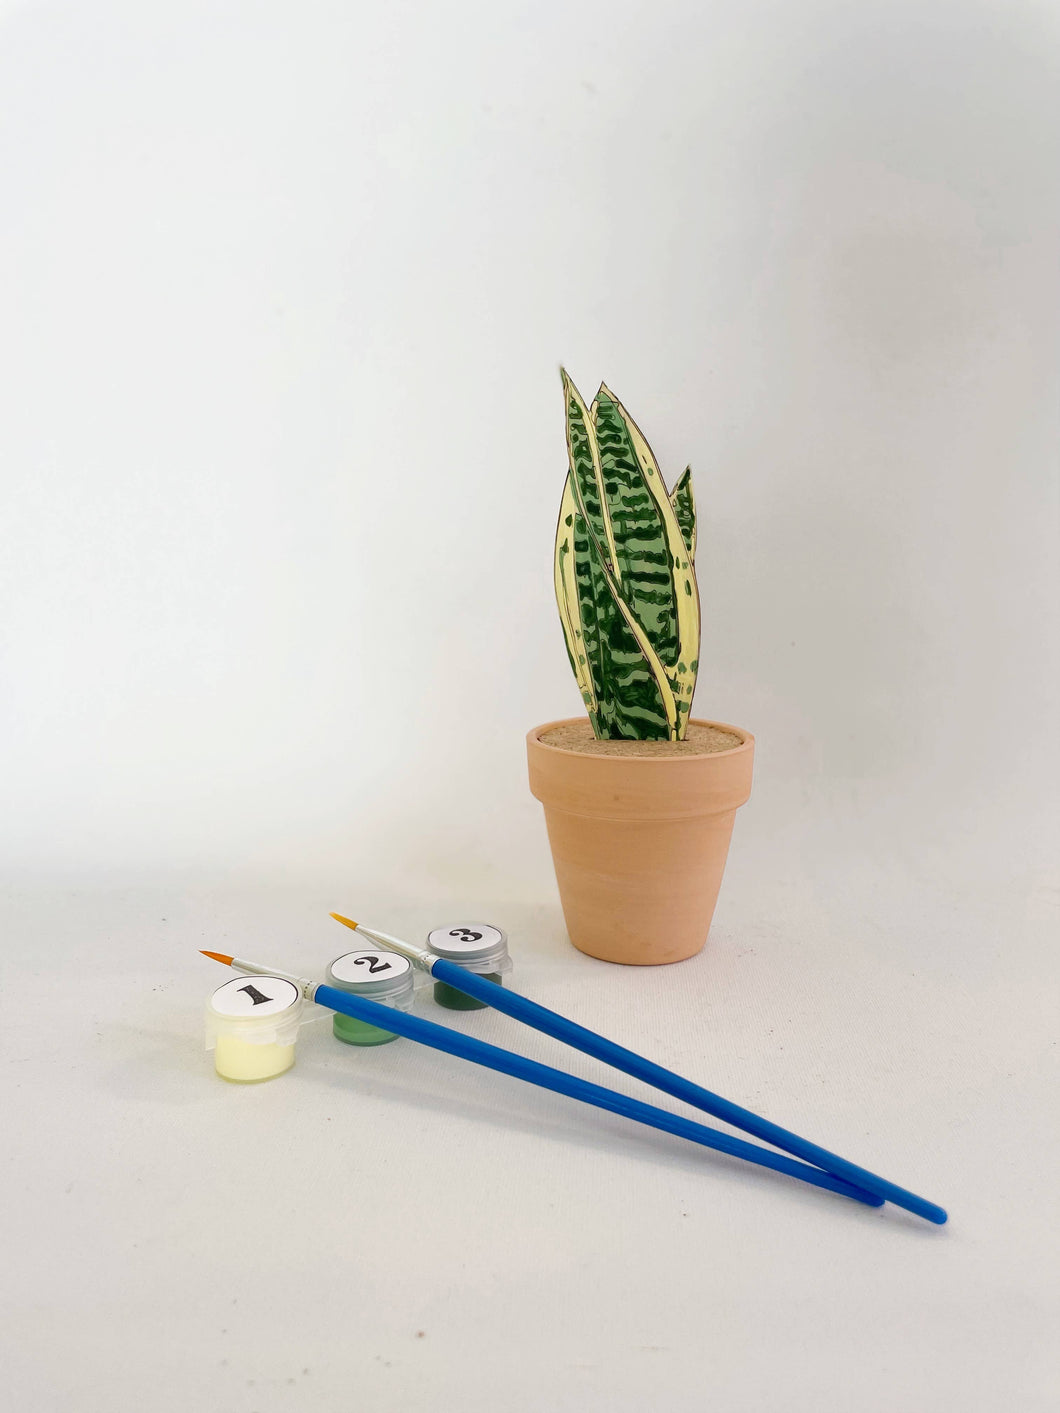 Paint Your Own: Snake Plant: Single Set